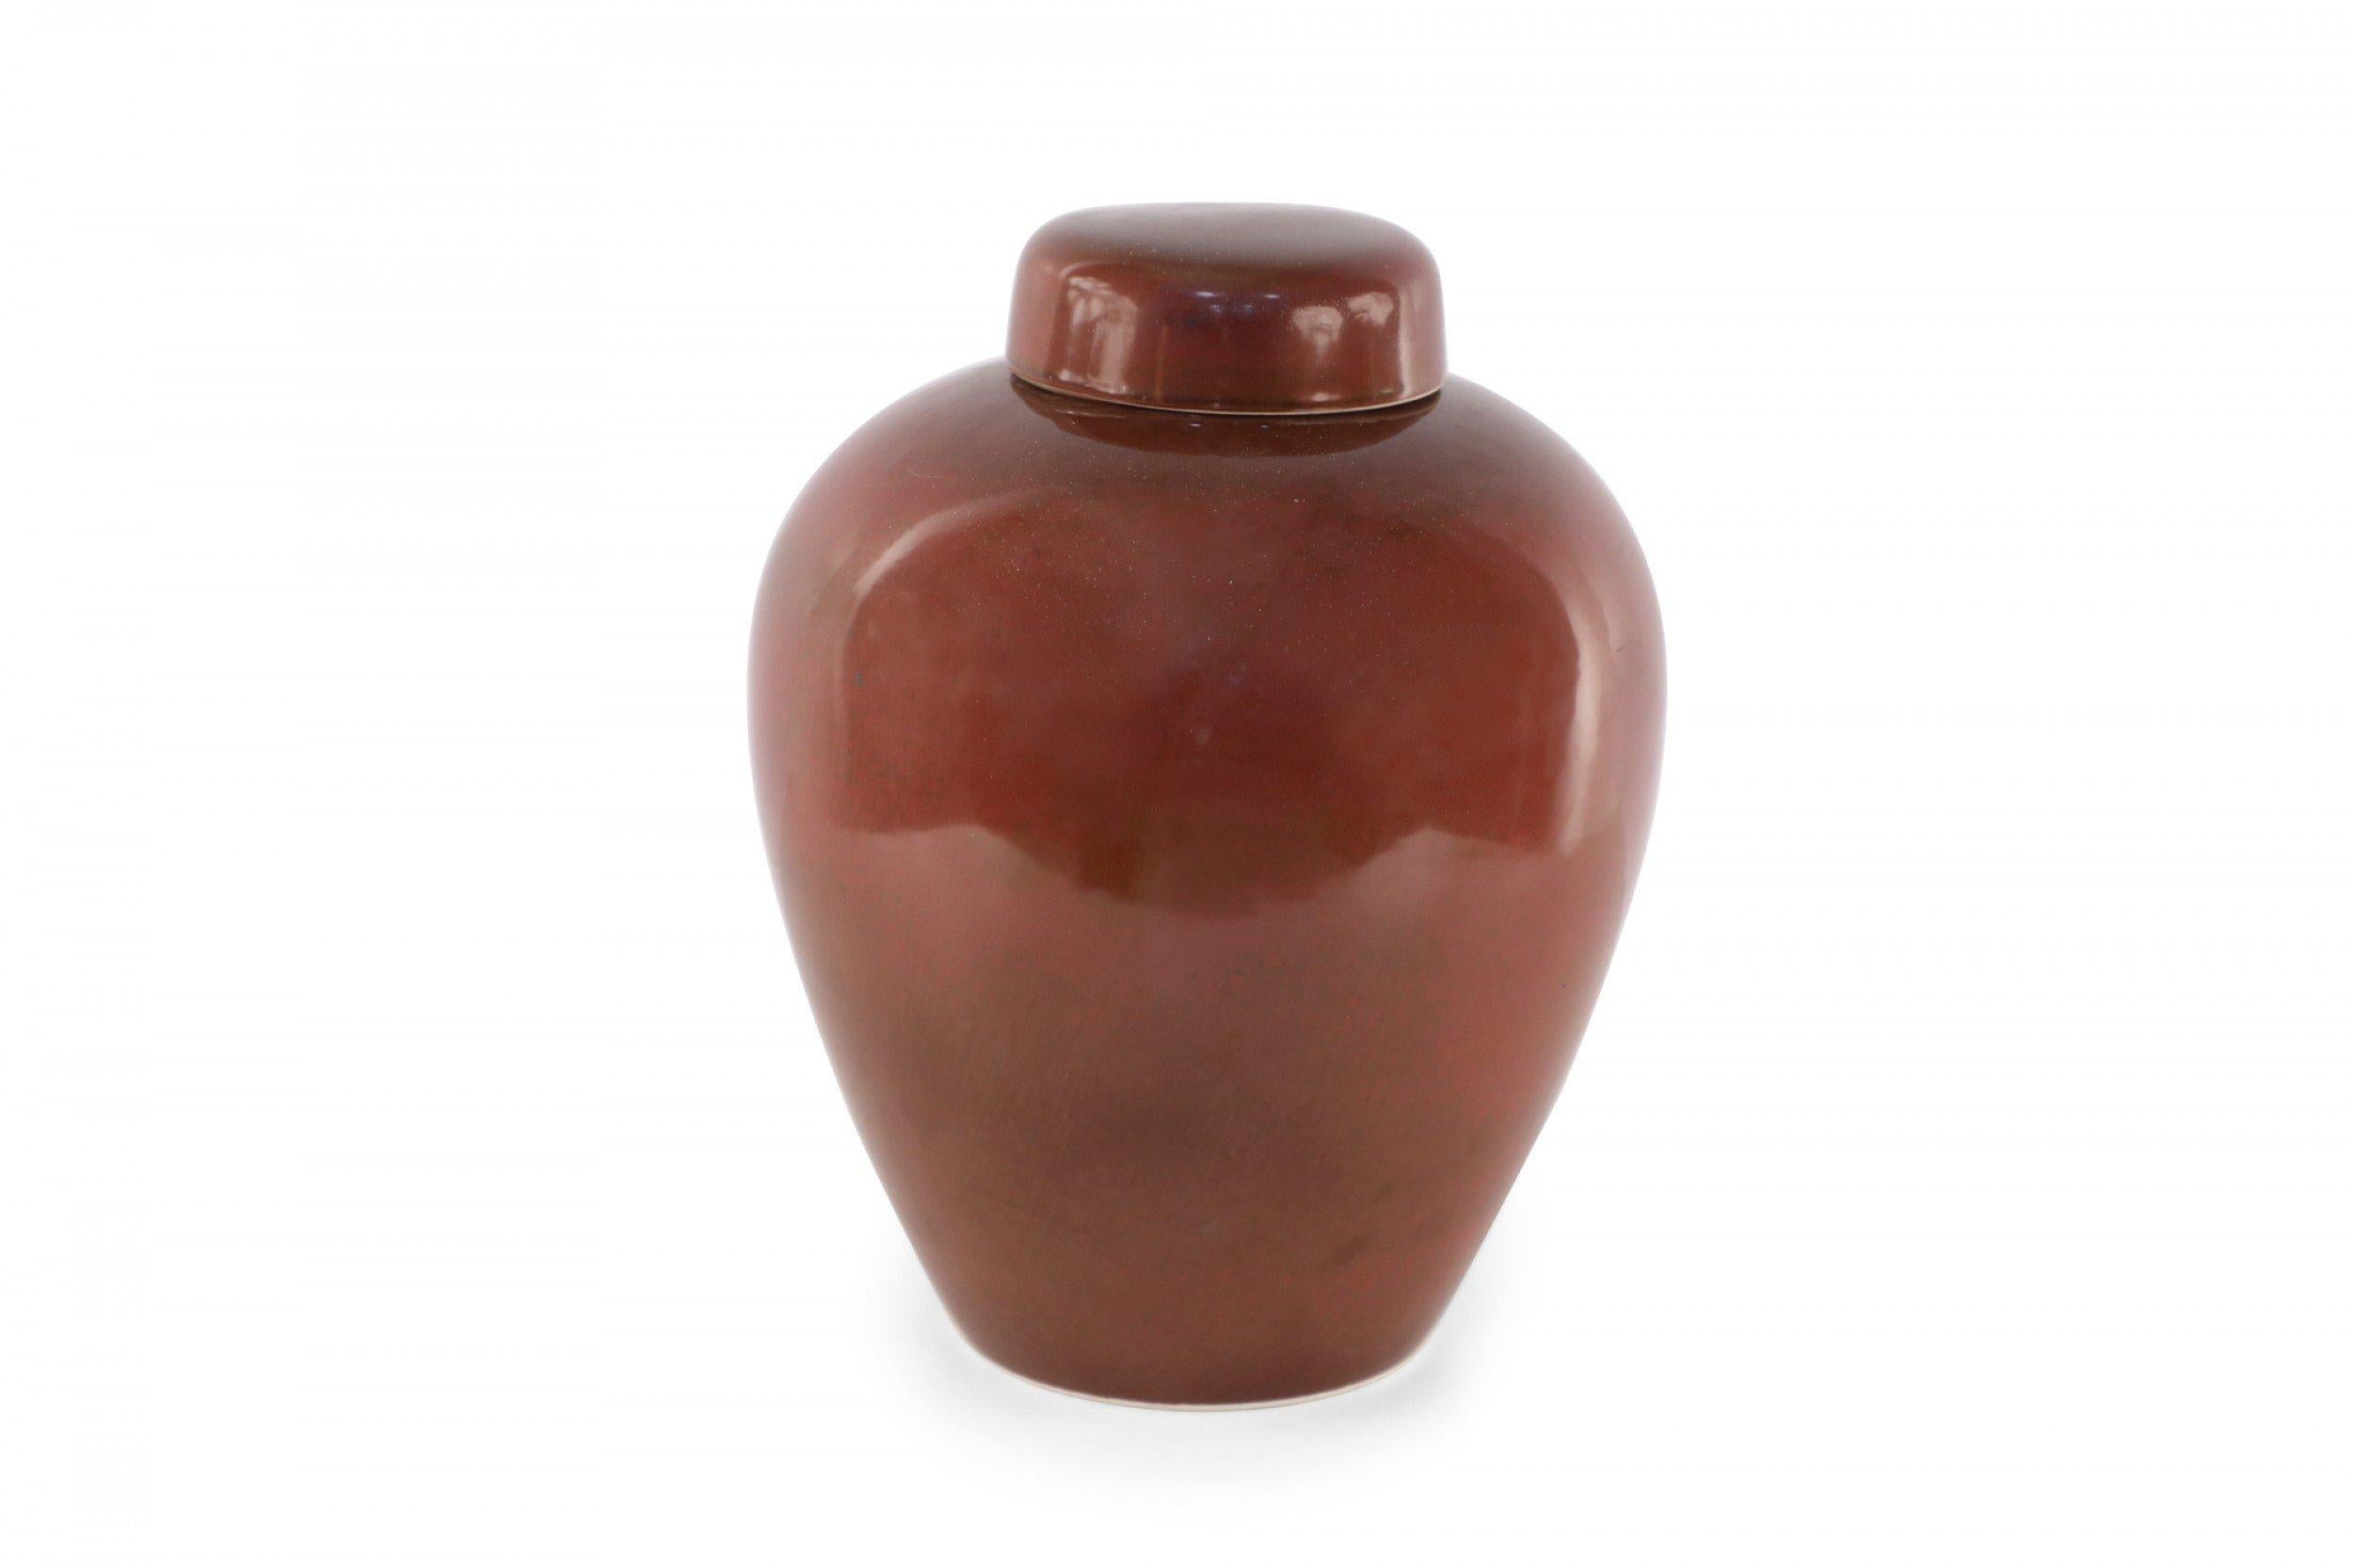 Chinese porcelain lidded ginger jar in a finish that shifts within a range of umber, red and maroon, adding dimension to its shape.
       